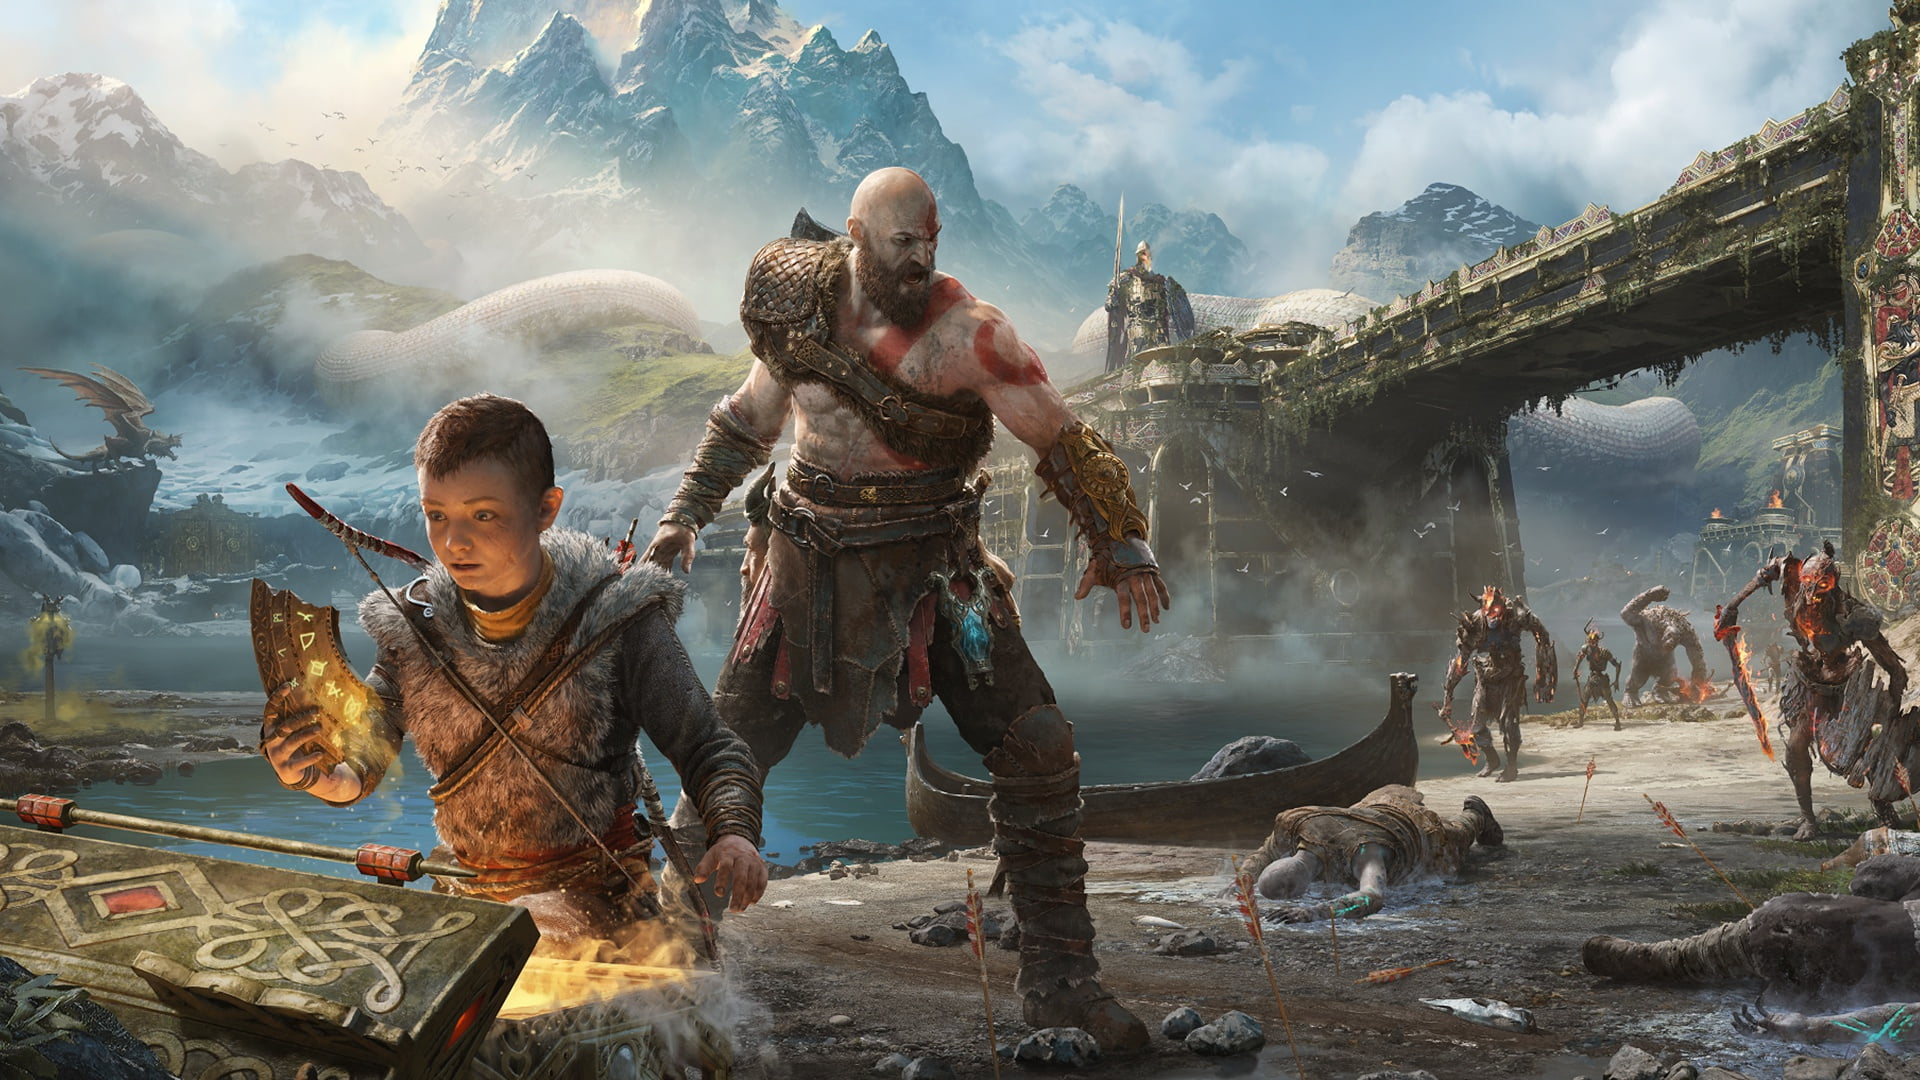 Game God of war 2018 Kratos  Wallpaper Poster 24 x 14 inches